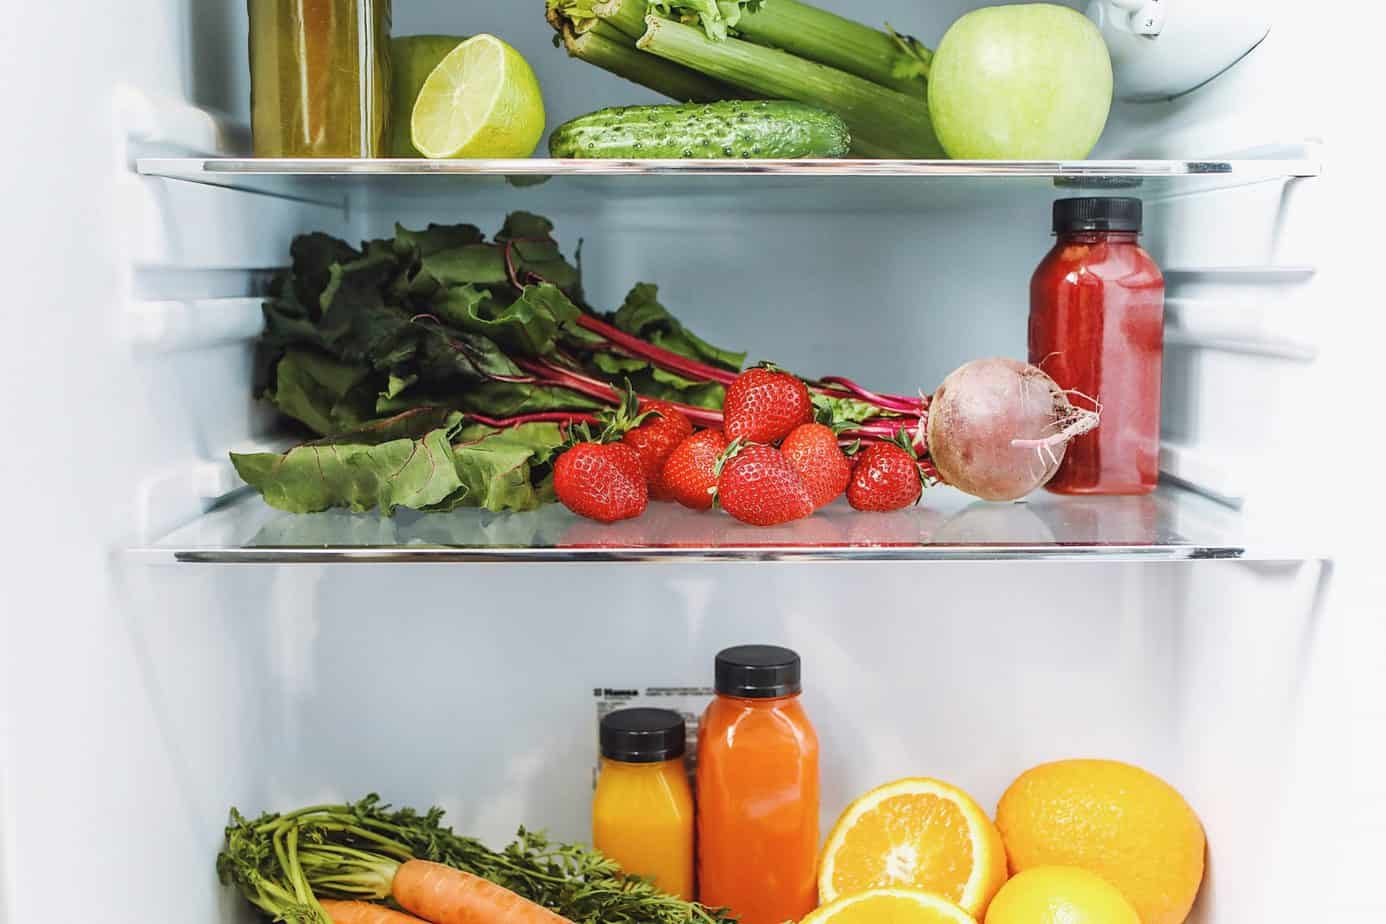 How to properly store vegetables in the refrigerator?